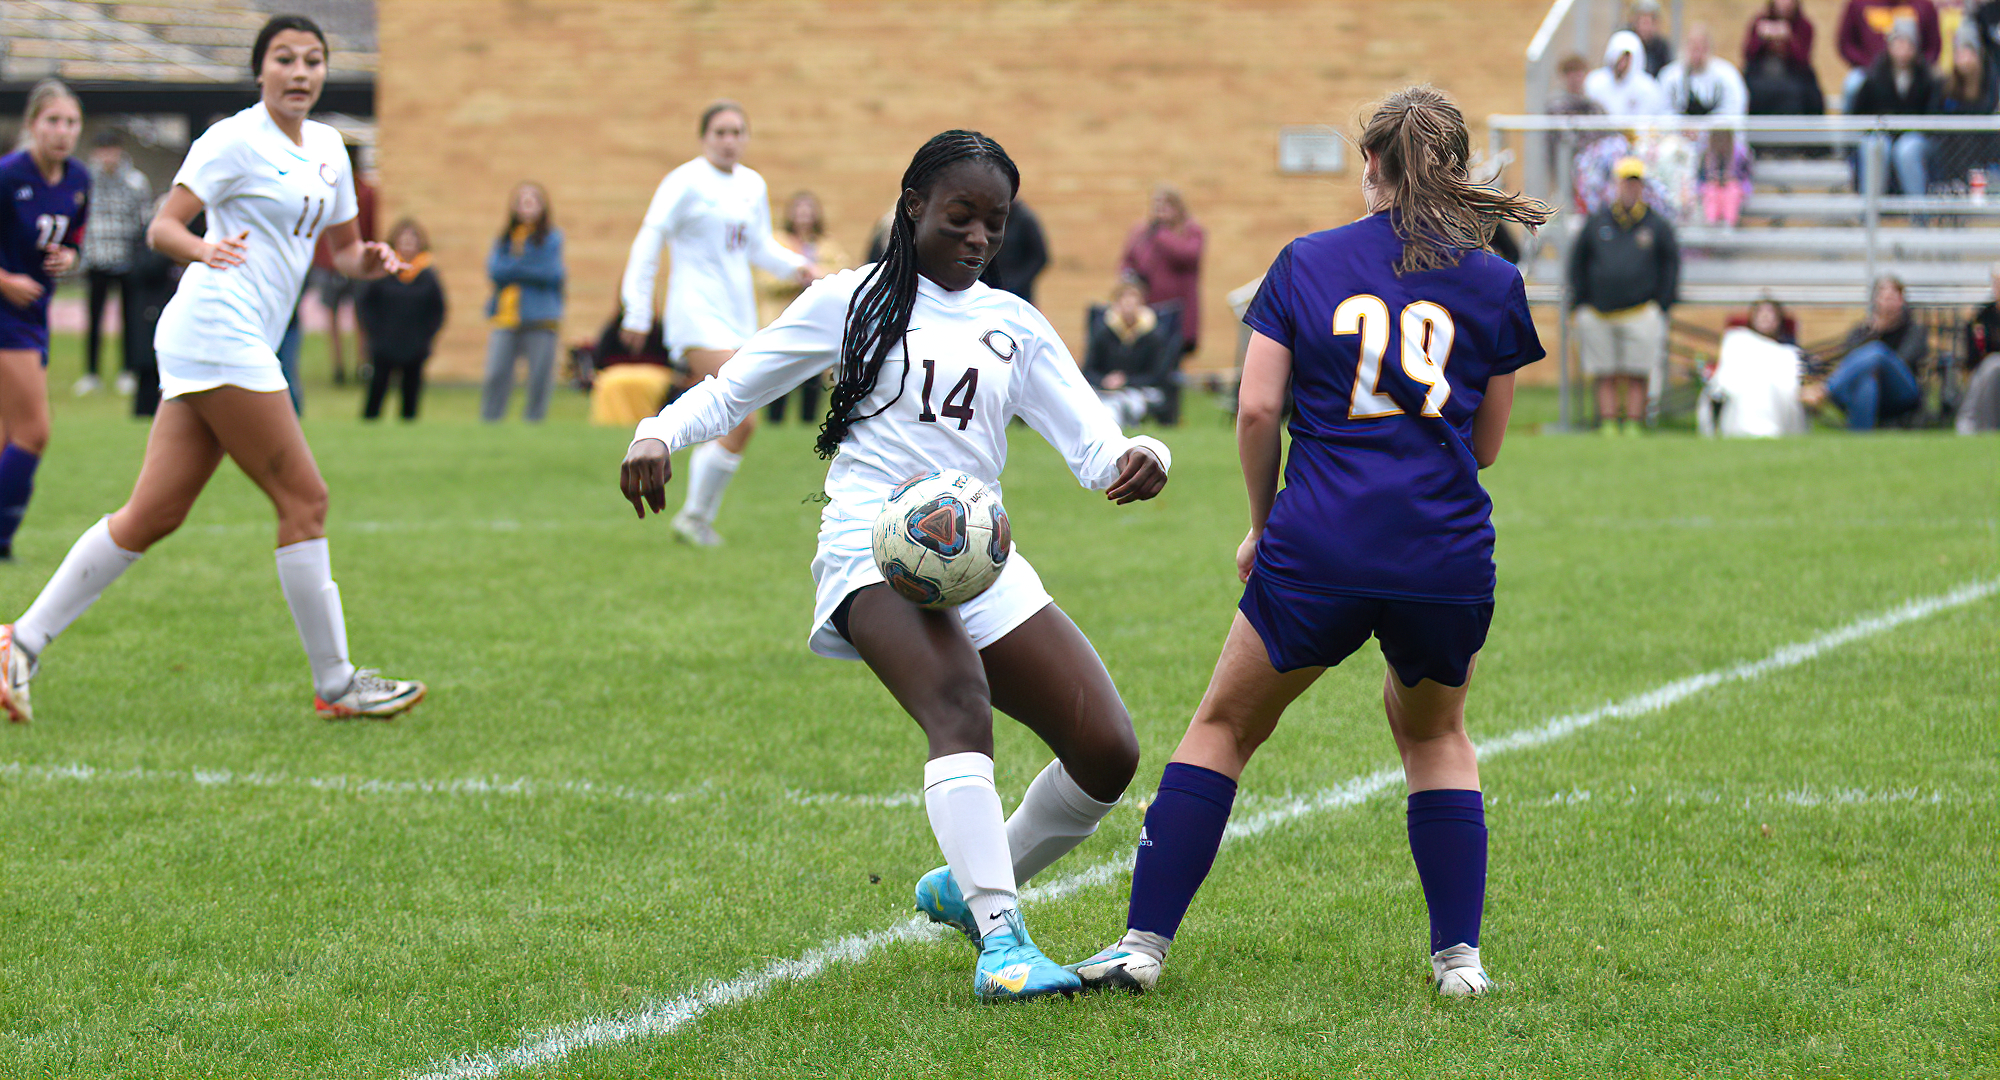 Sophomore Hannah Mukhtar scored the game-winning goal in the Cobbers' 1-0 win at St. Scholastica.